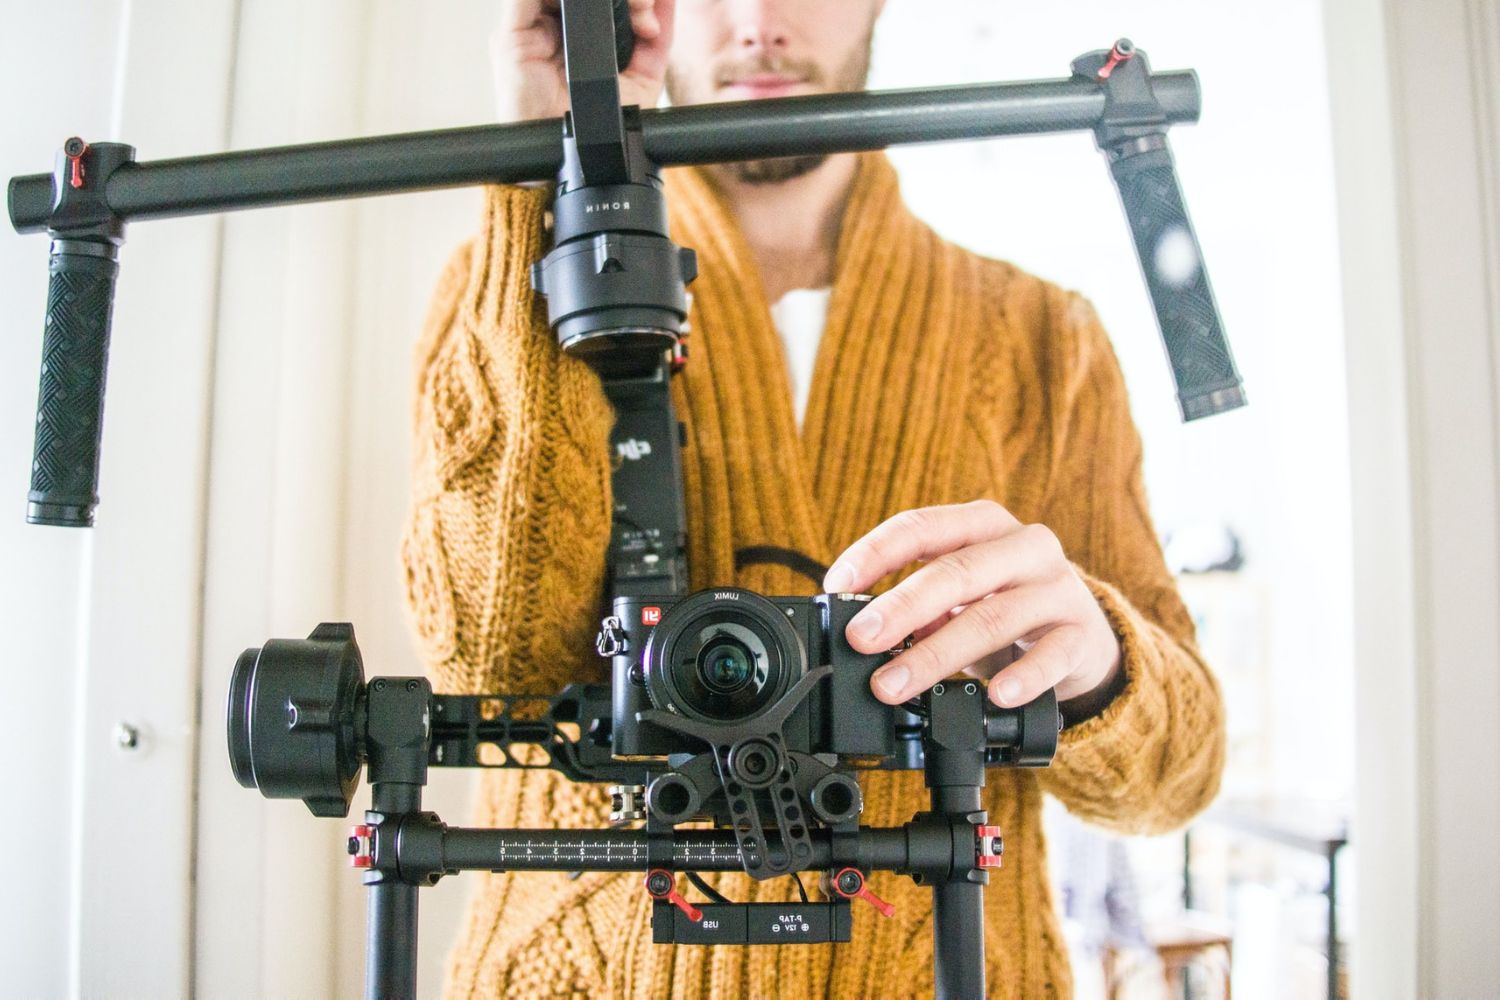 photo of a man holding a camera with stabilizer by Marvin Meyer on Unsplash